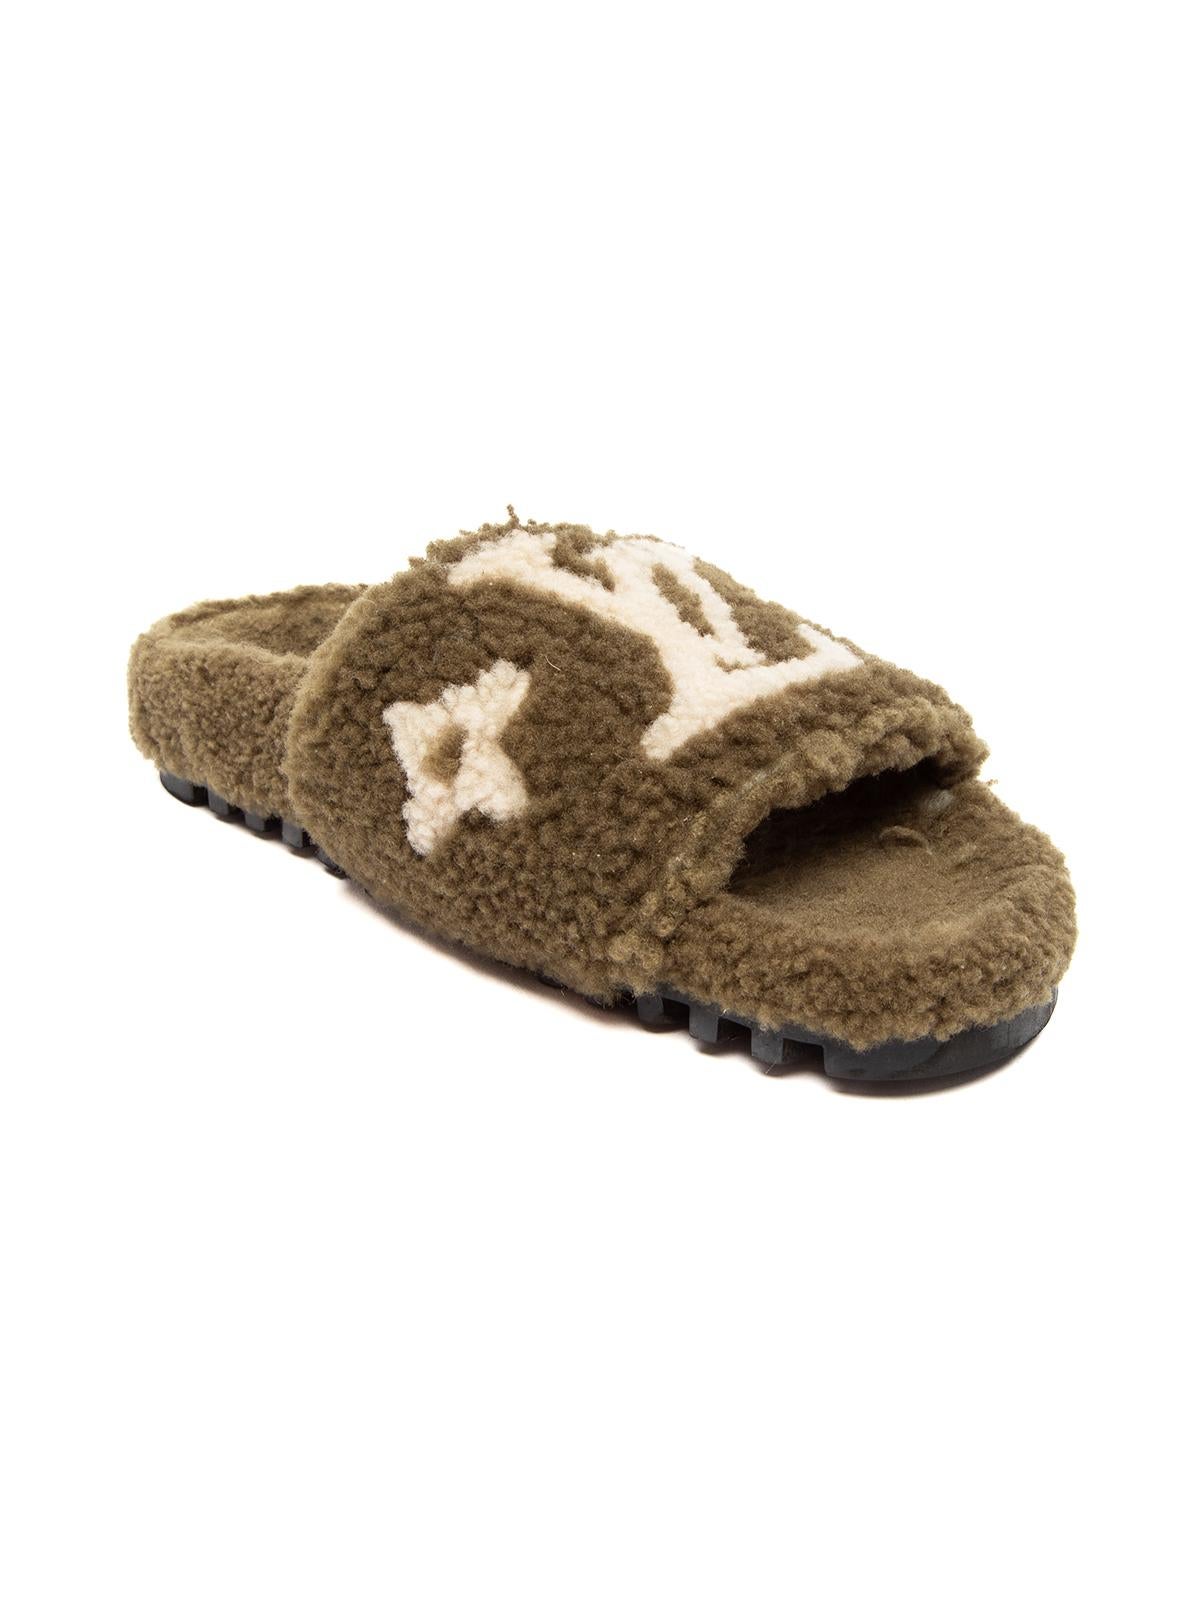 Louis Vuitton Shearling Slippers - For Sale on 1stDibs